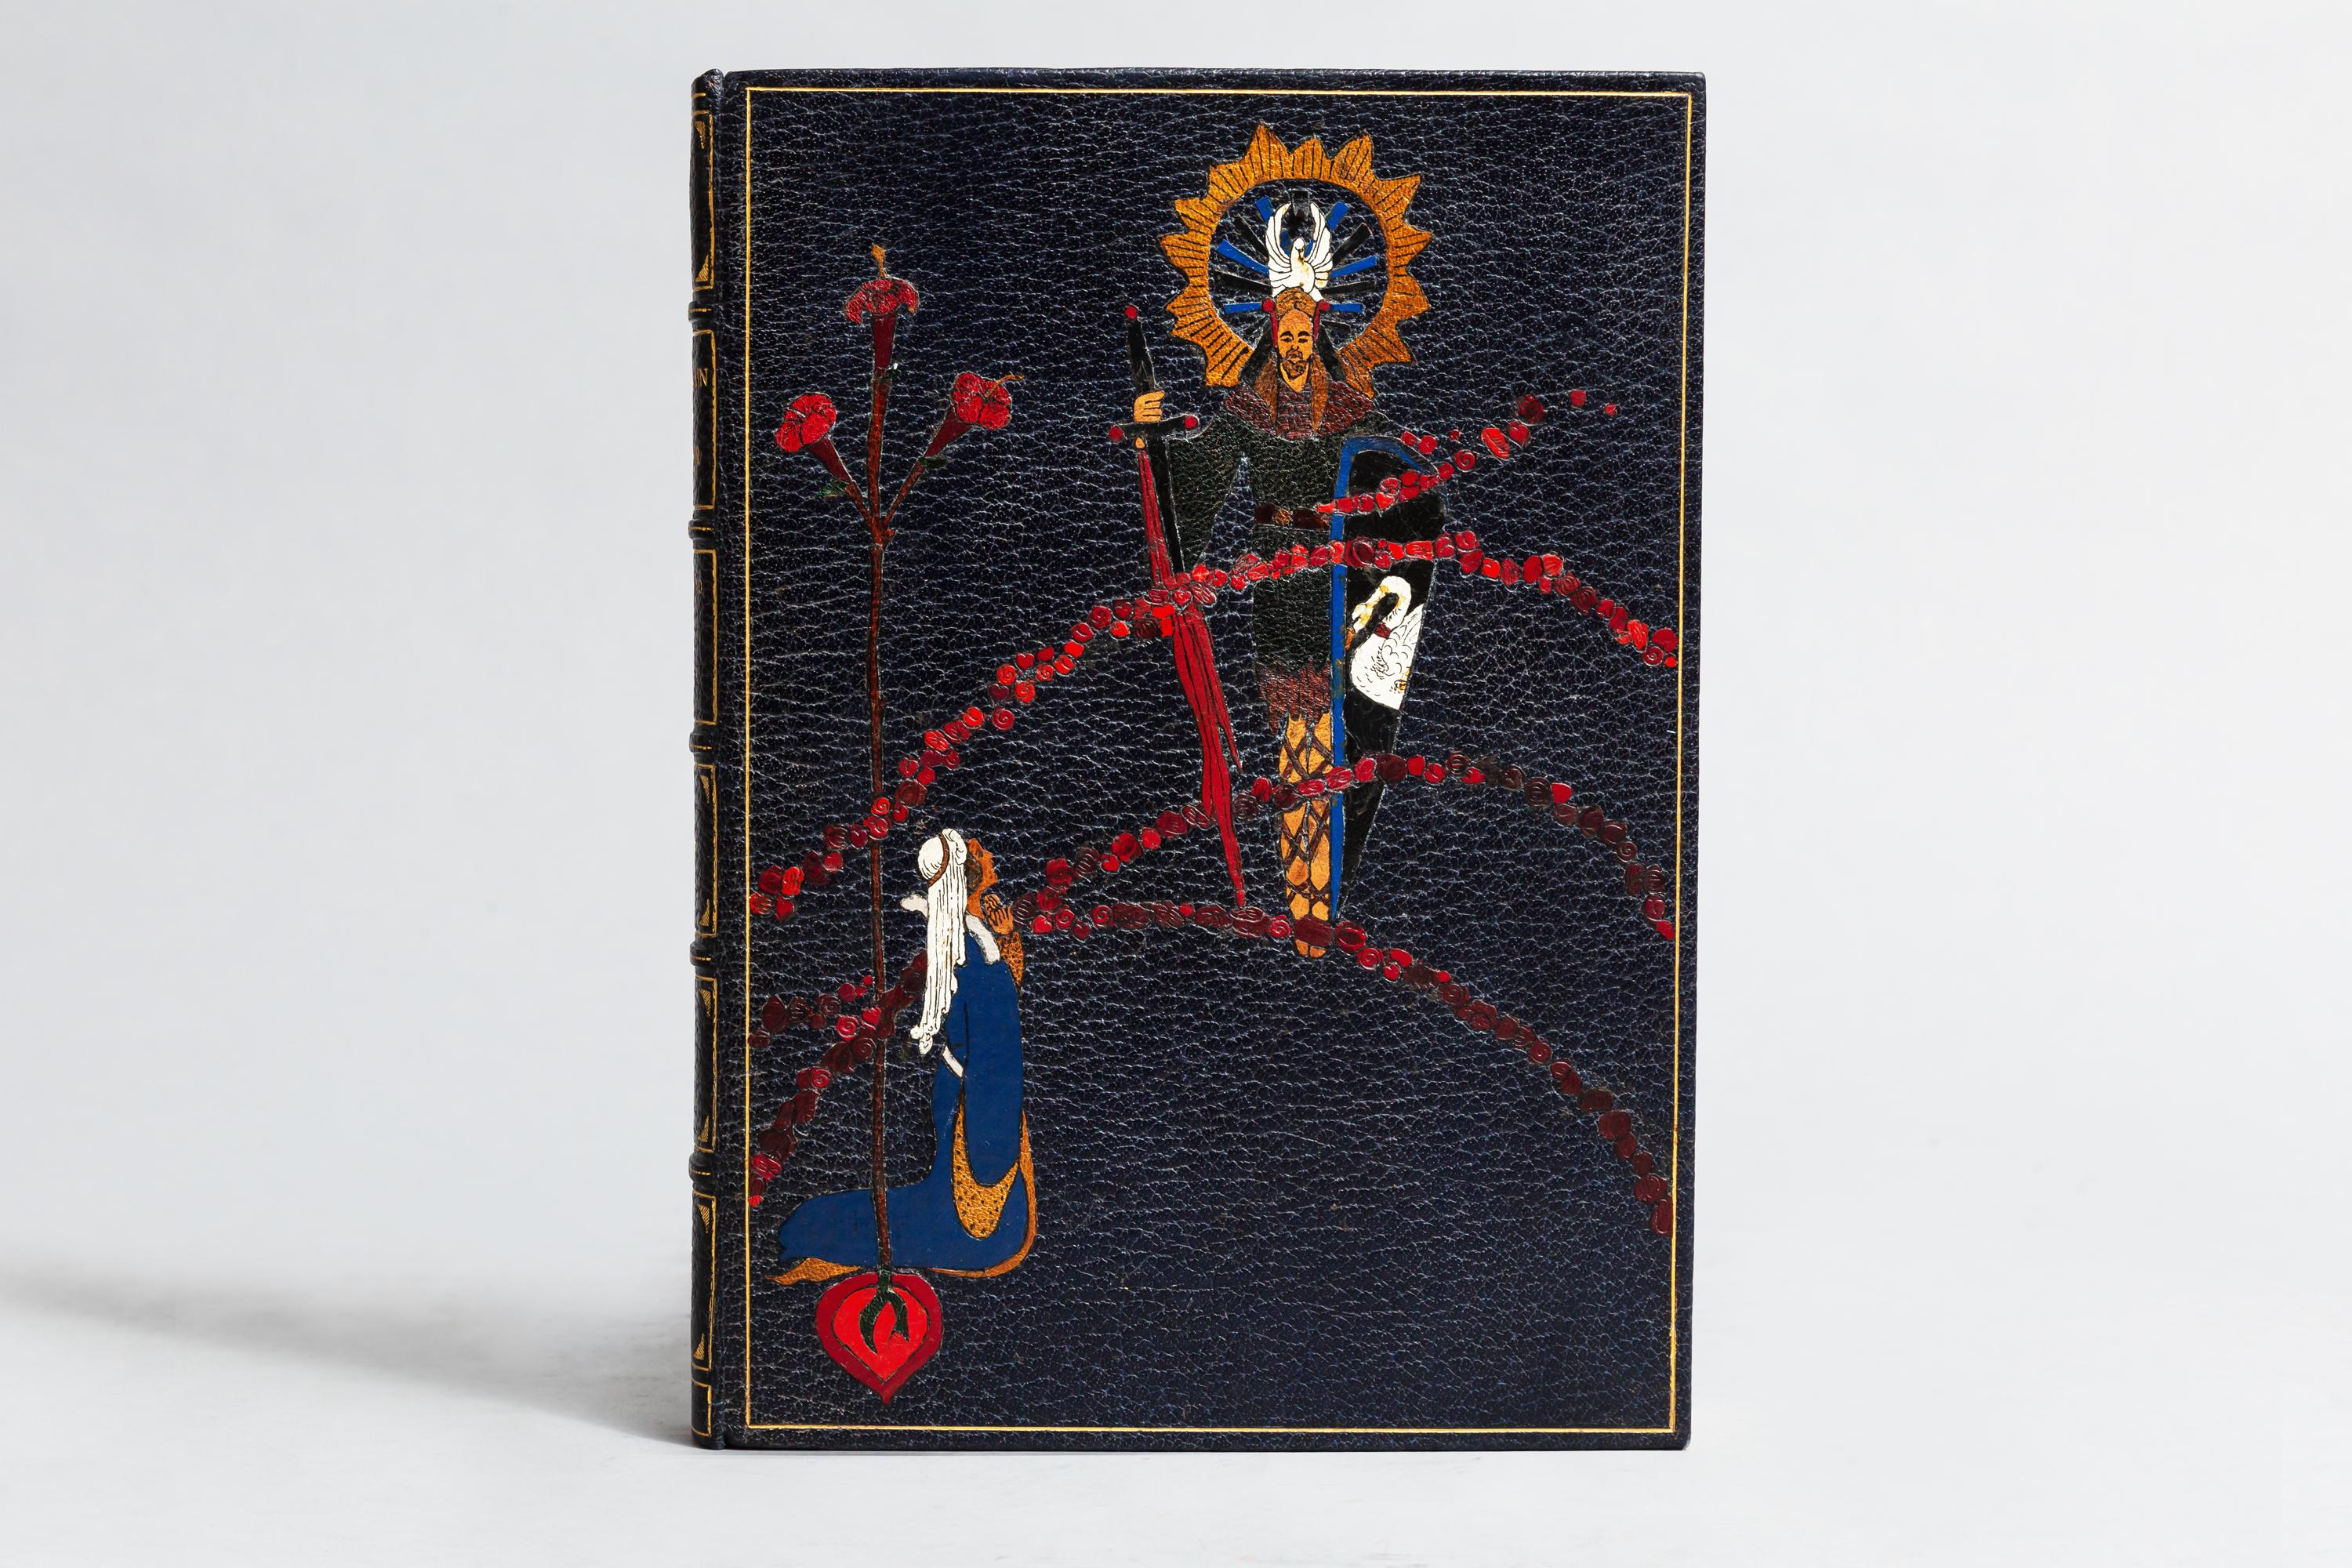 1 volume. 

T.W. Rolleston. 

The Tale Of Lohengrin. Knight Of The Swan After The Drama of Richard Wagner.

Illustrated in color by Willy Pogany. Bound in full blue Morocco with multi-colored inlays on the front cover by Bayntun, all edges